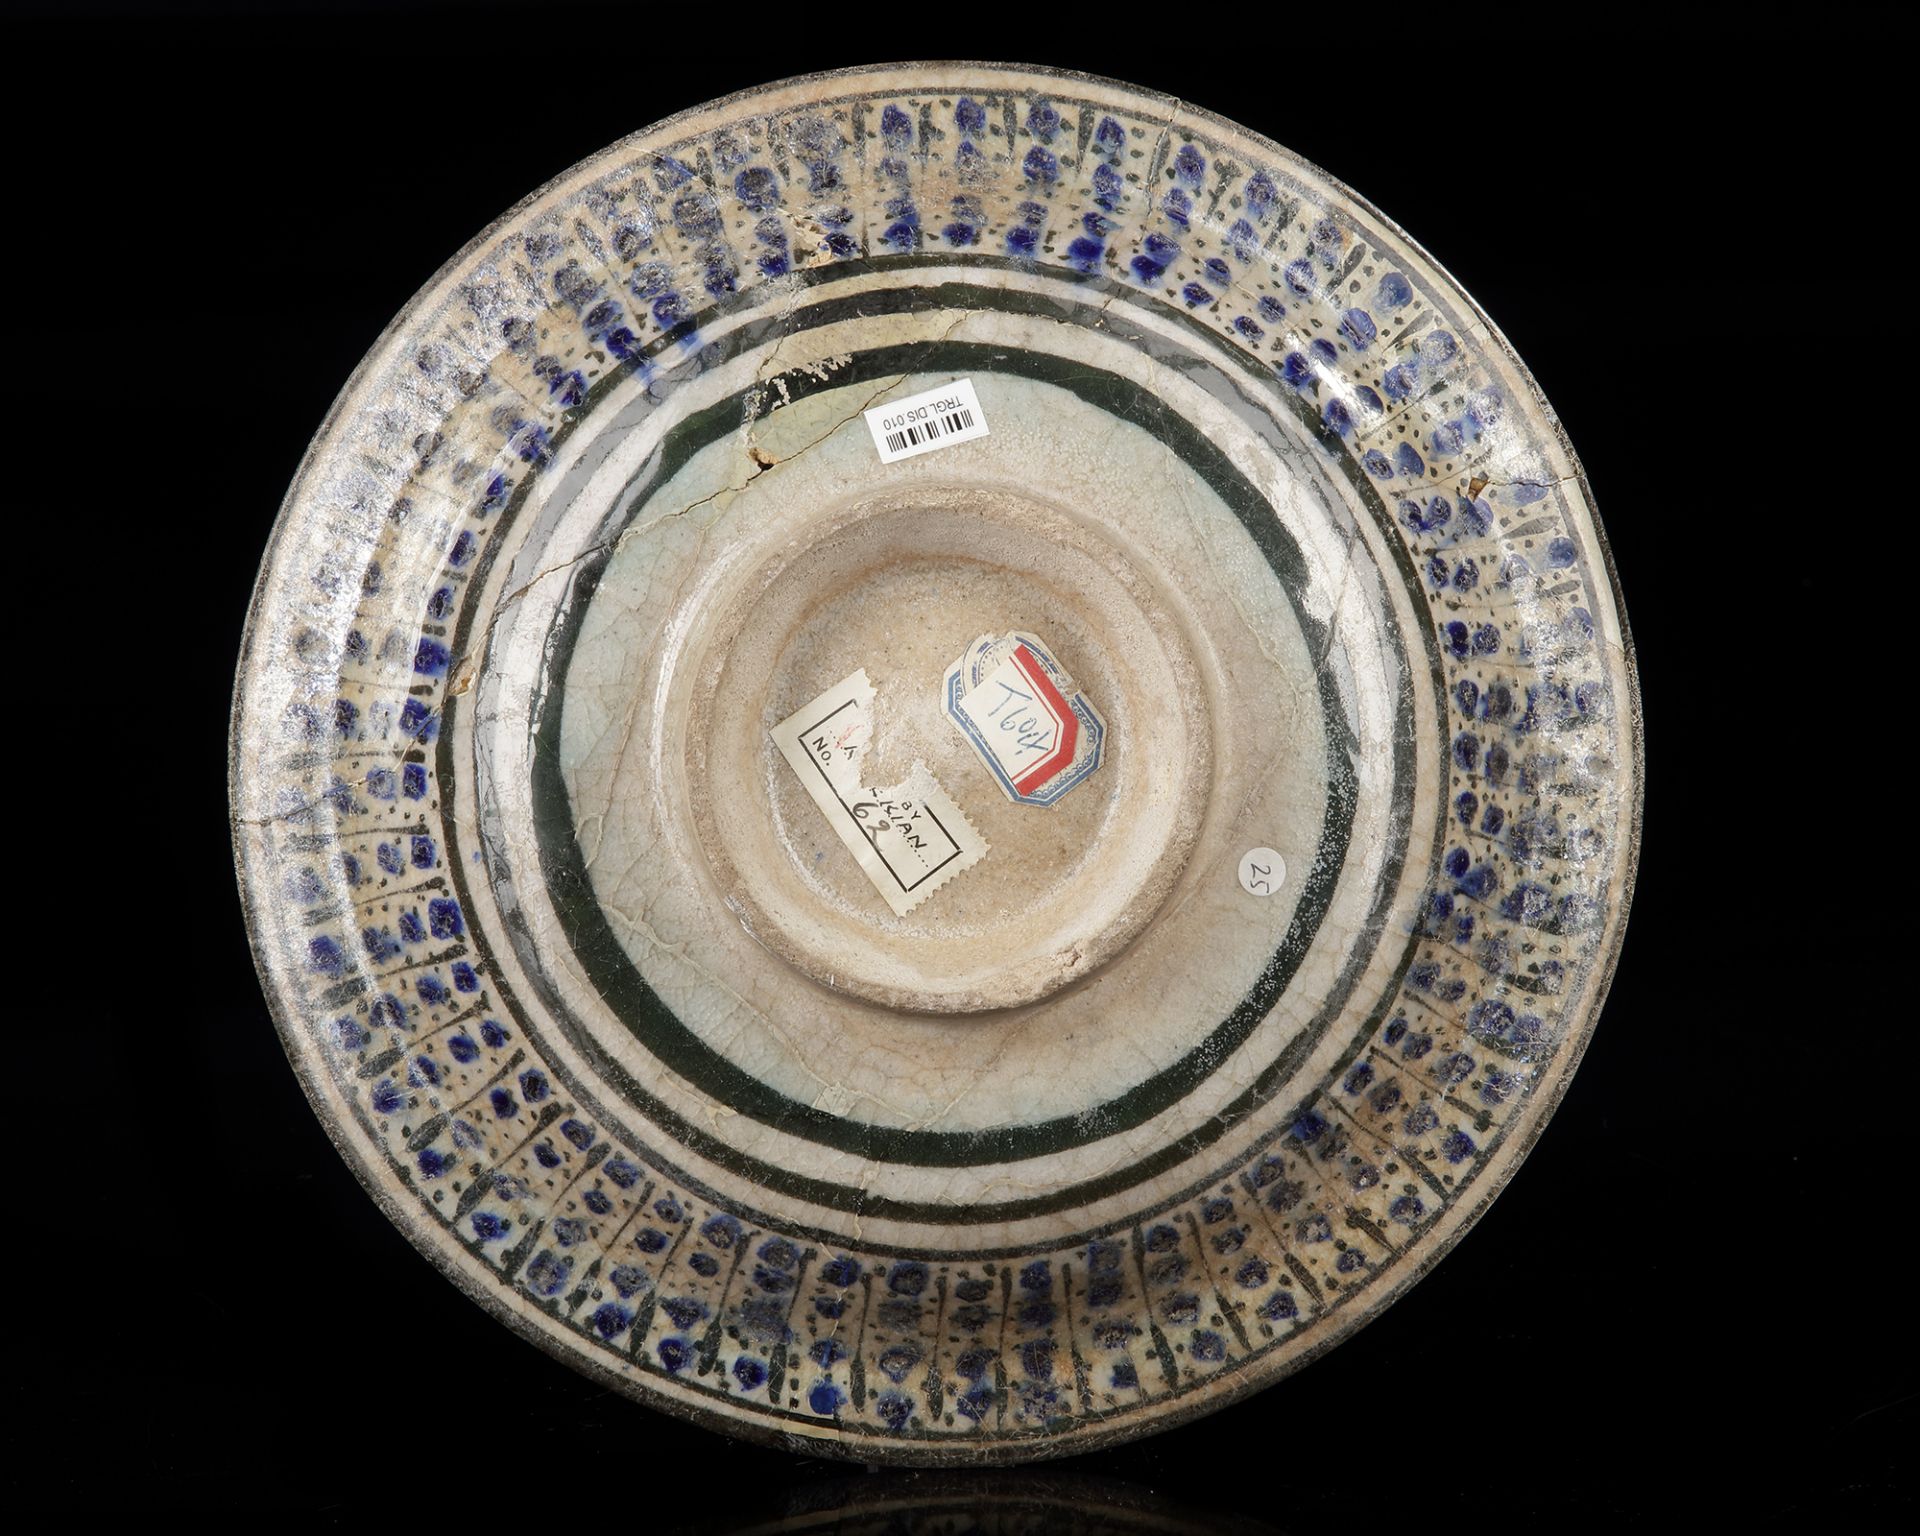 A SULTANABAD POTTERY DISH, NORTH PERSIA, LATE 13TH-EARLY 14TH CENTURY - Image 4 of 4